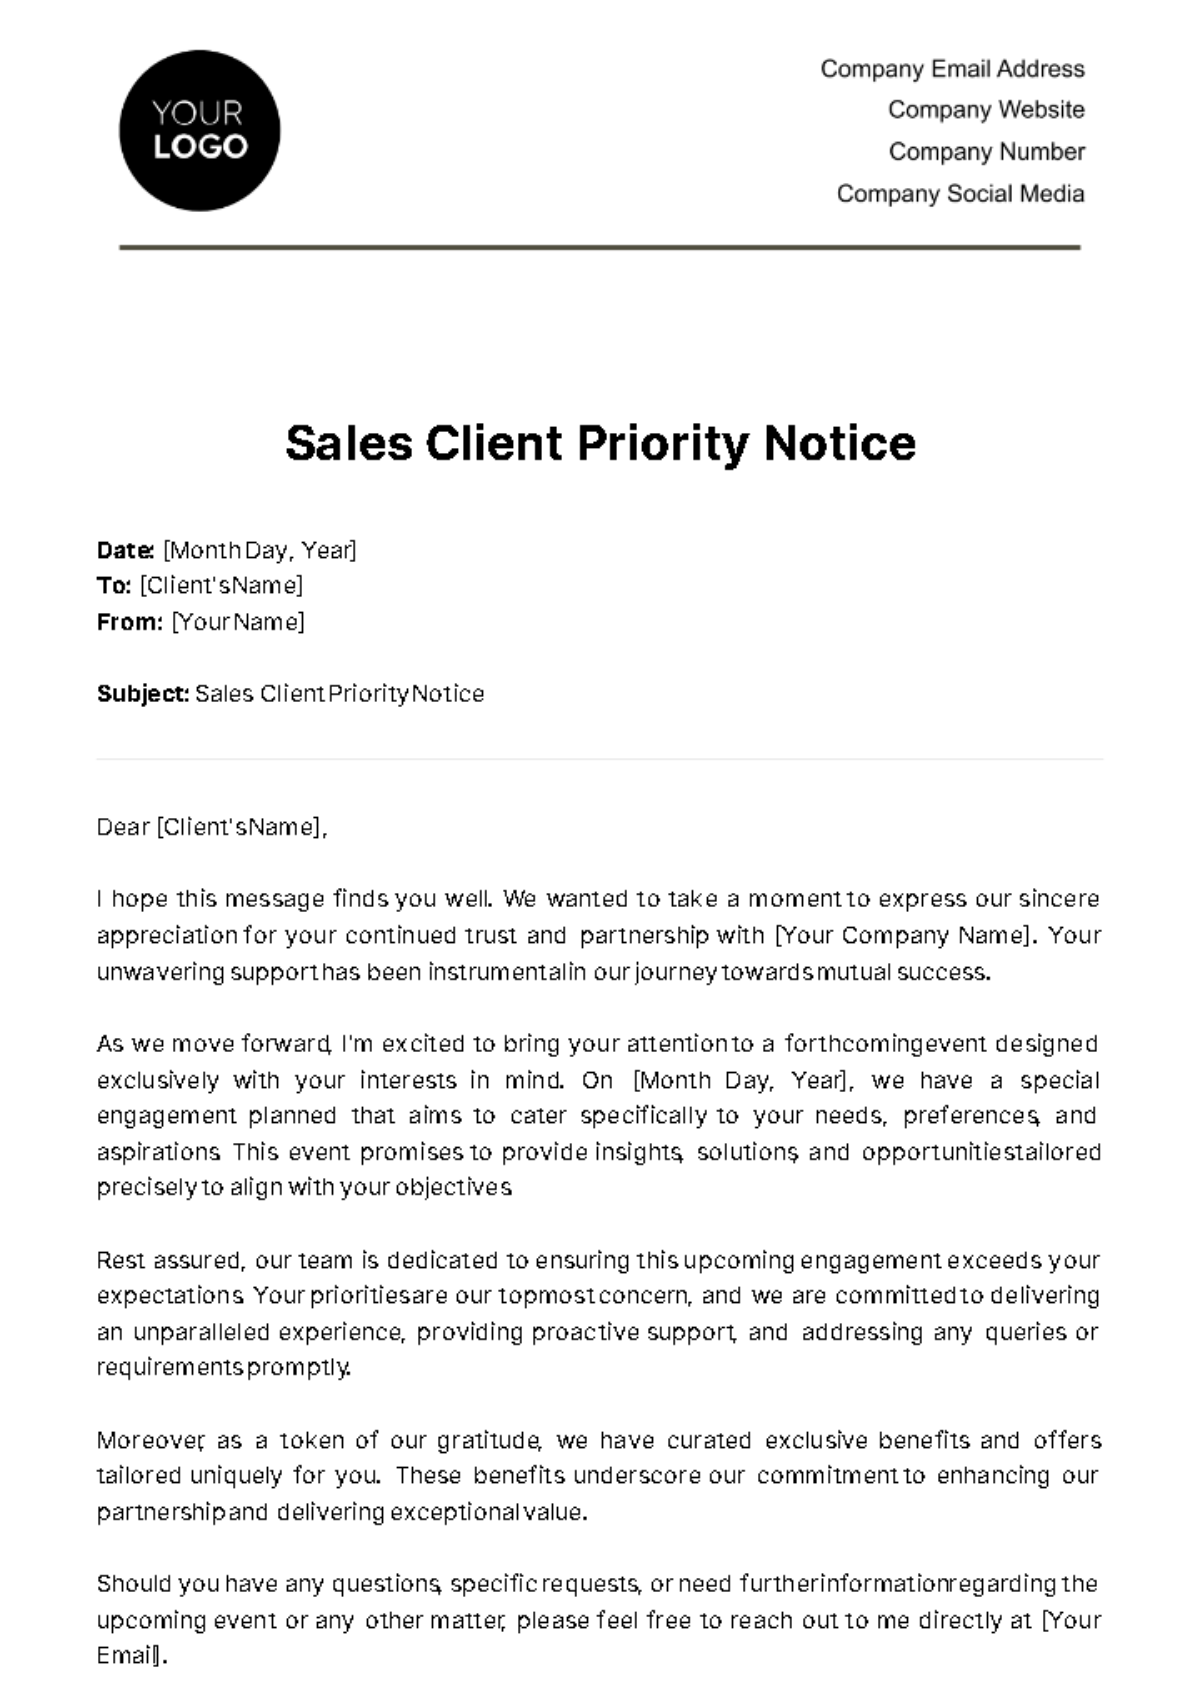 Free Sales Client Priority Notice Template